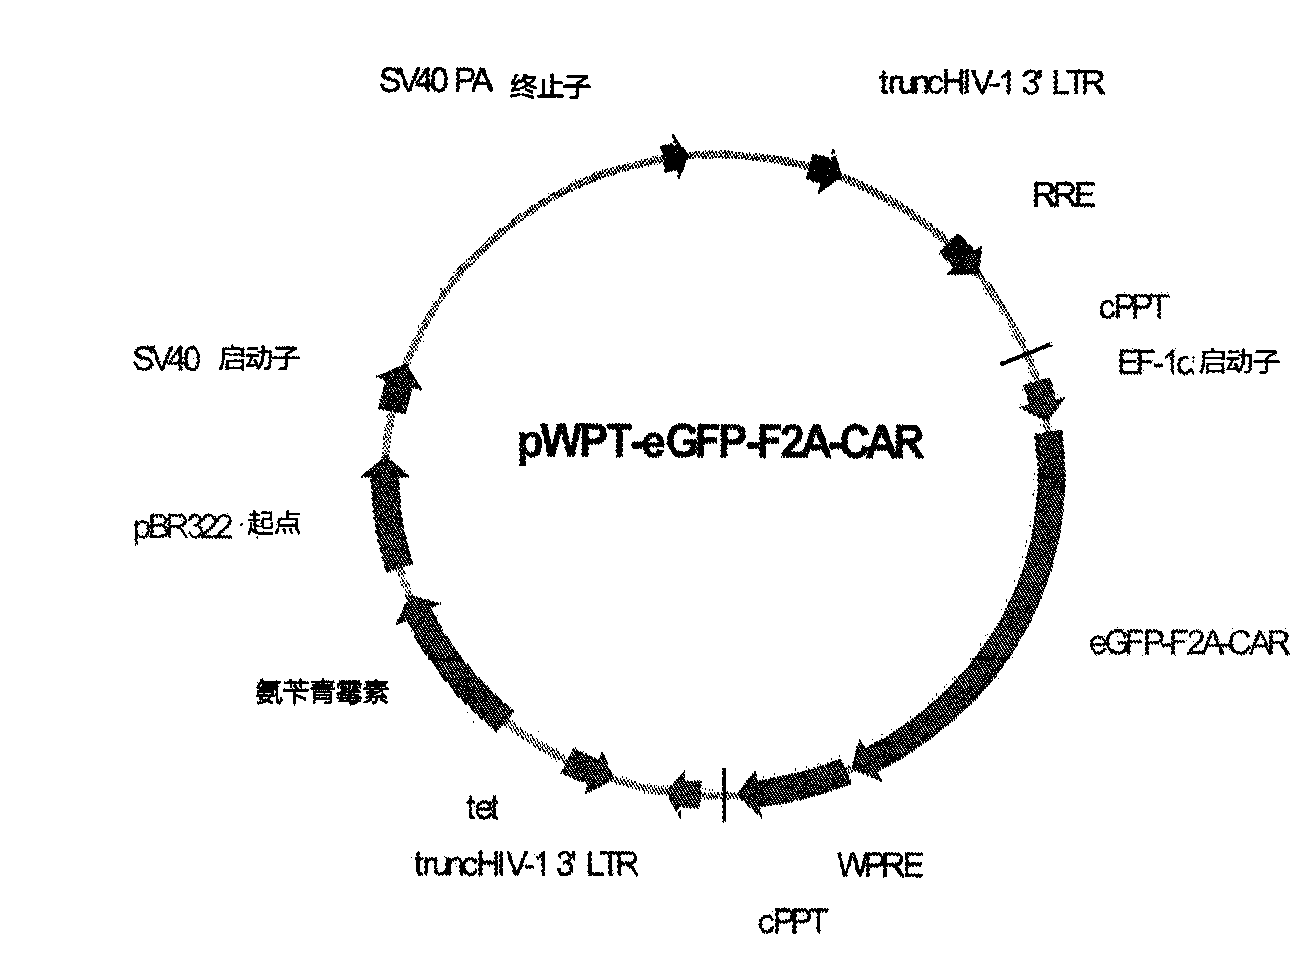 Nucleic acid for coding chimeric antigen receptor protein and T lymphocyte for expression of chimeric antigen receptor protein